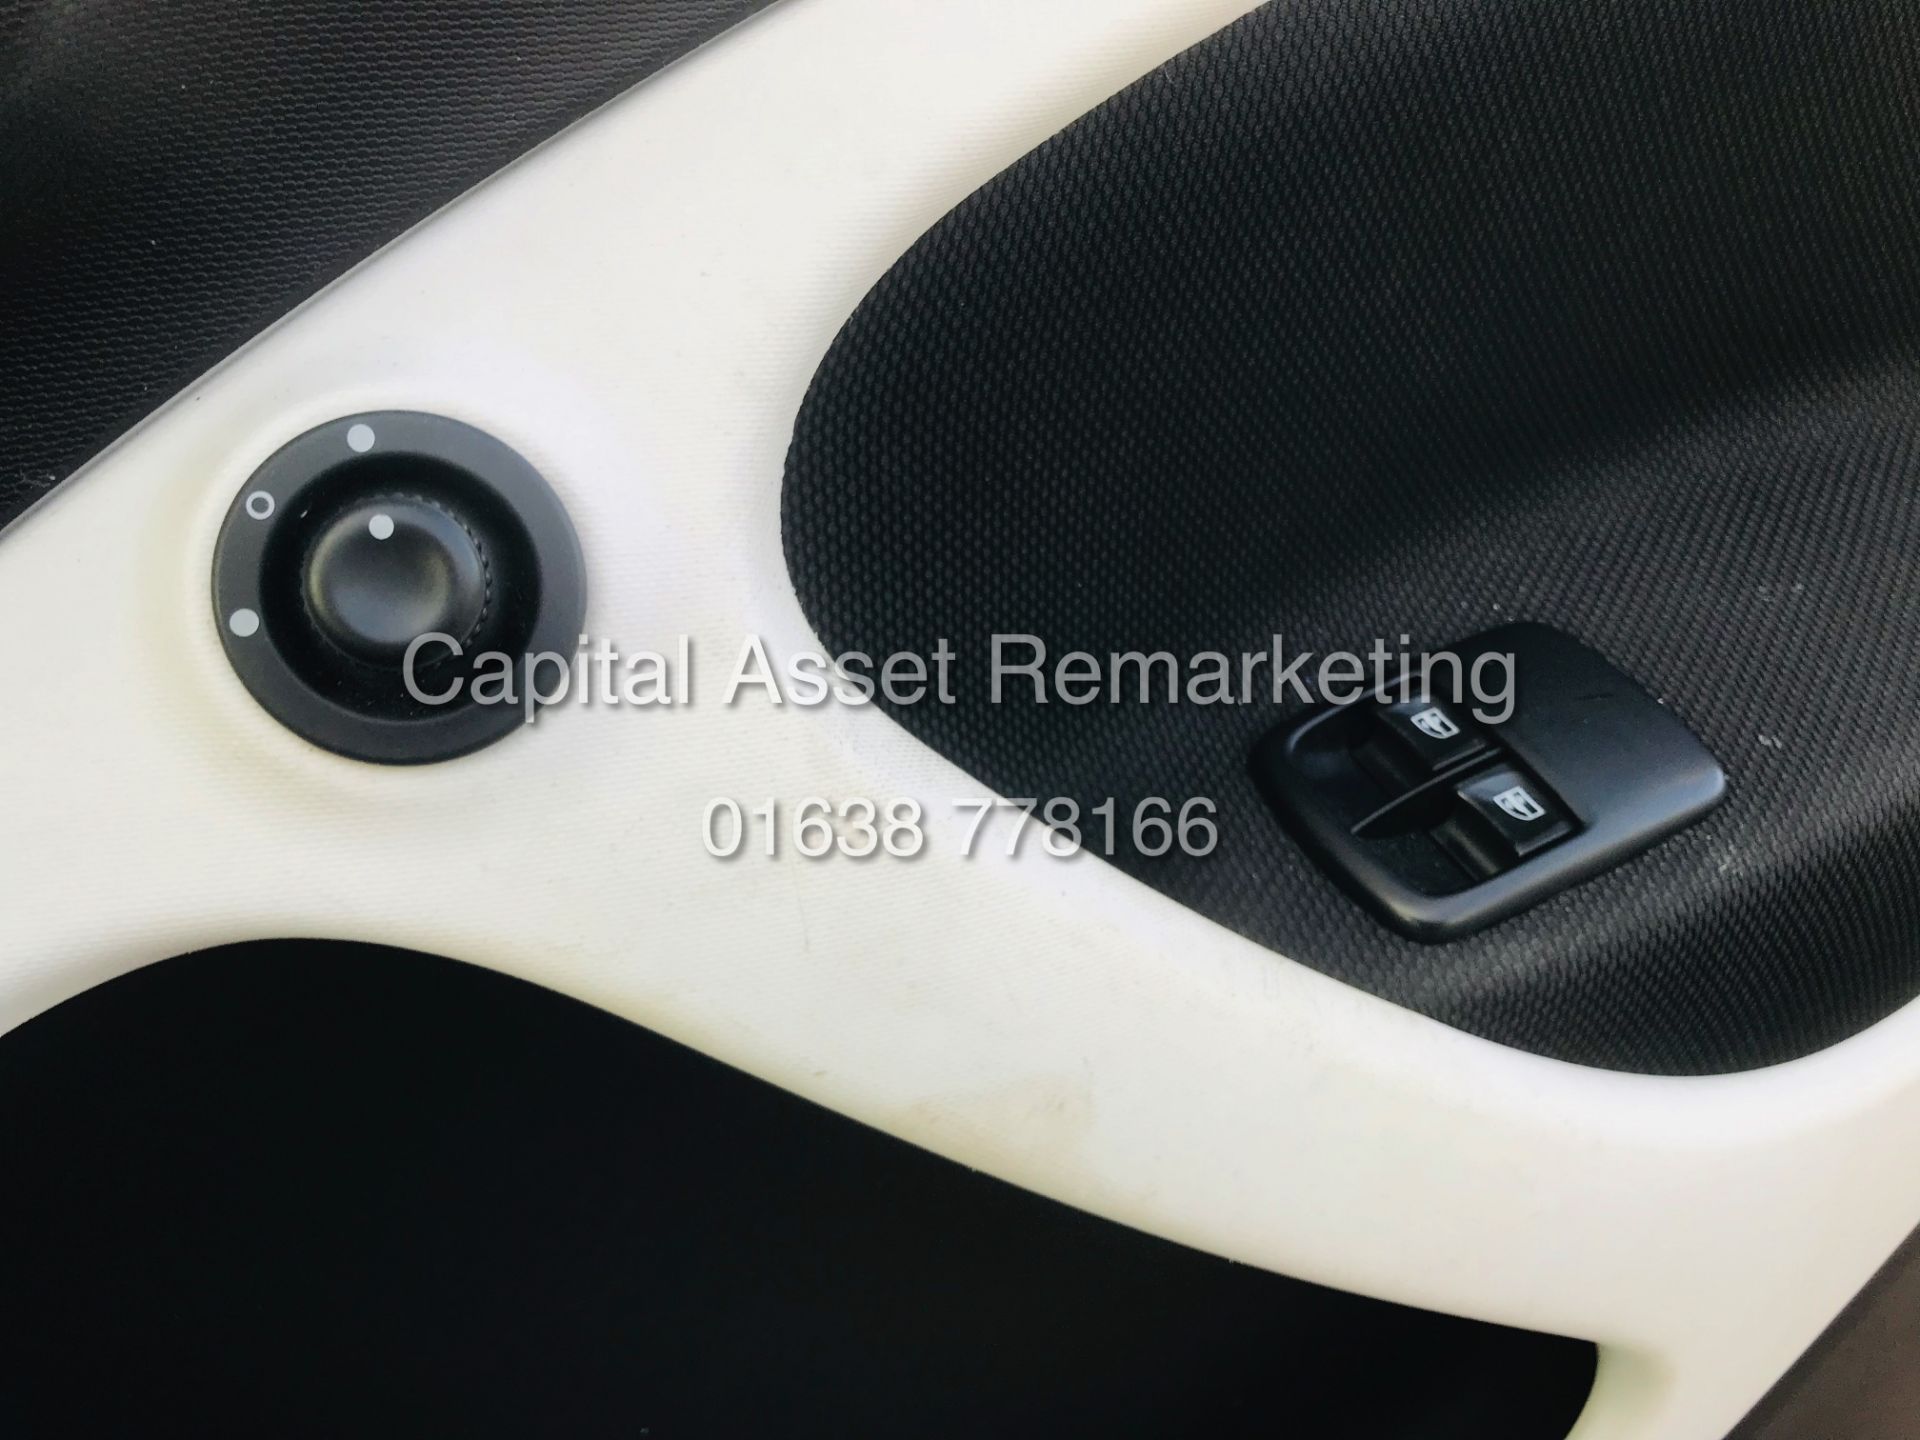 (On Sale)MERCEDES SMART FORFOUR "PRIME PREMIUM" 5 DR (15 REG - NEW) ONLY 30,000 MILES - CLIMATE & AC - Image 9 of 15